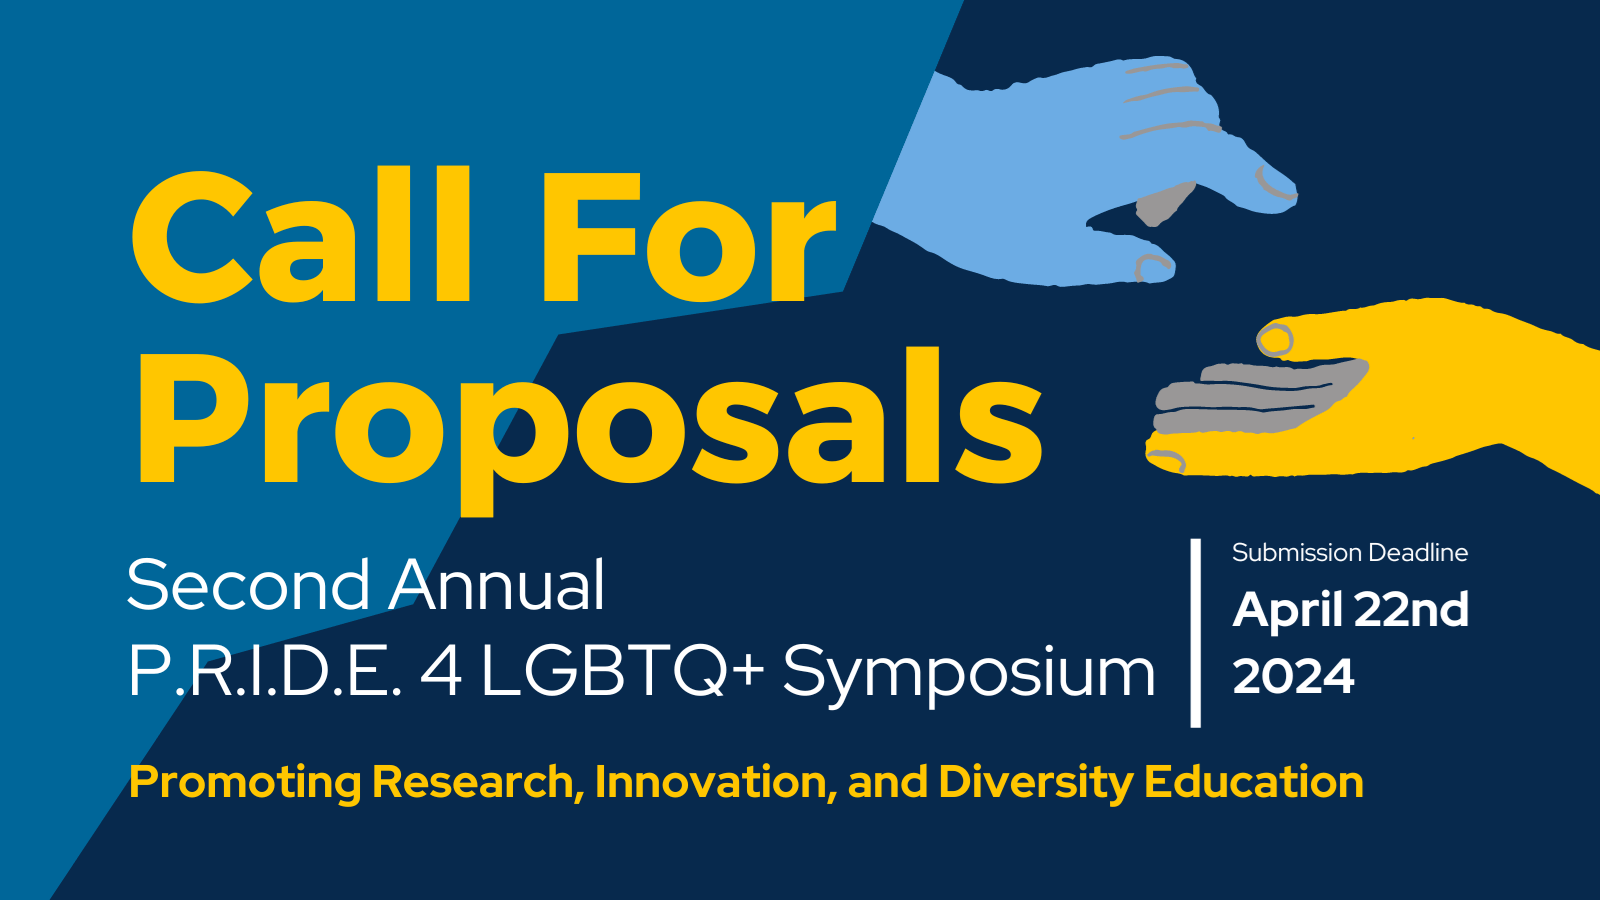 Call for Proposals - P.R.I.D.E. 4 LGBTQ+ SYMPOSIUM - 2nd Annual